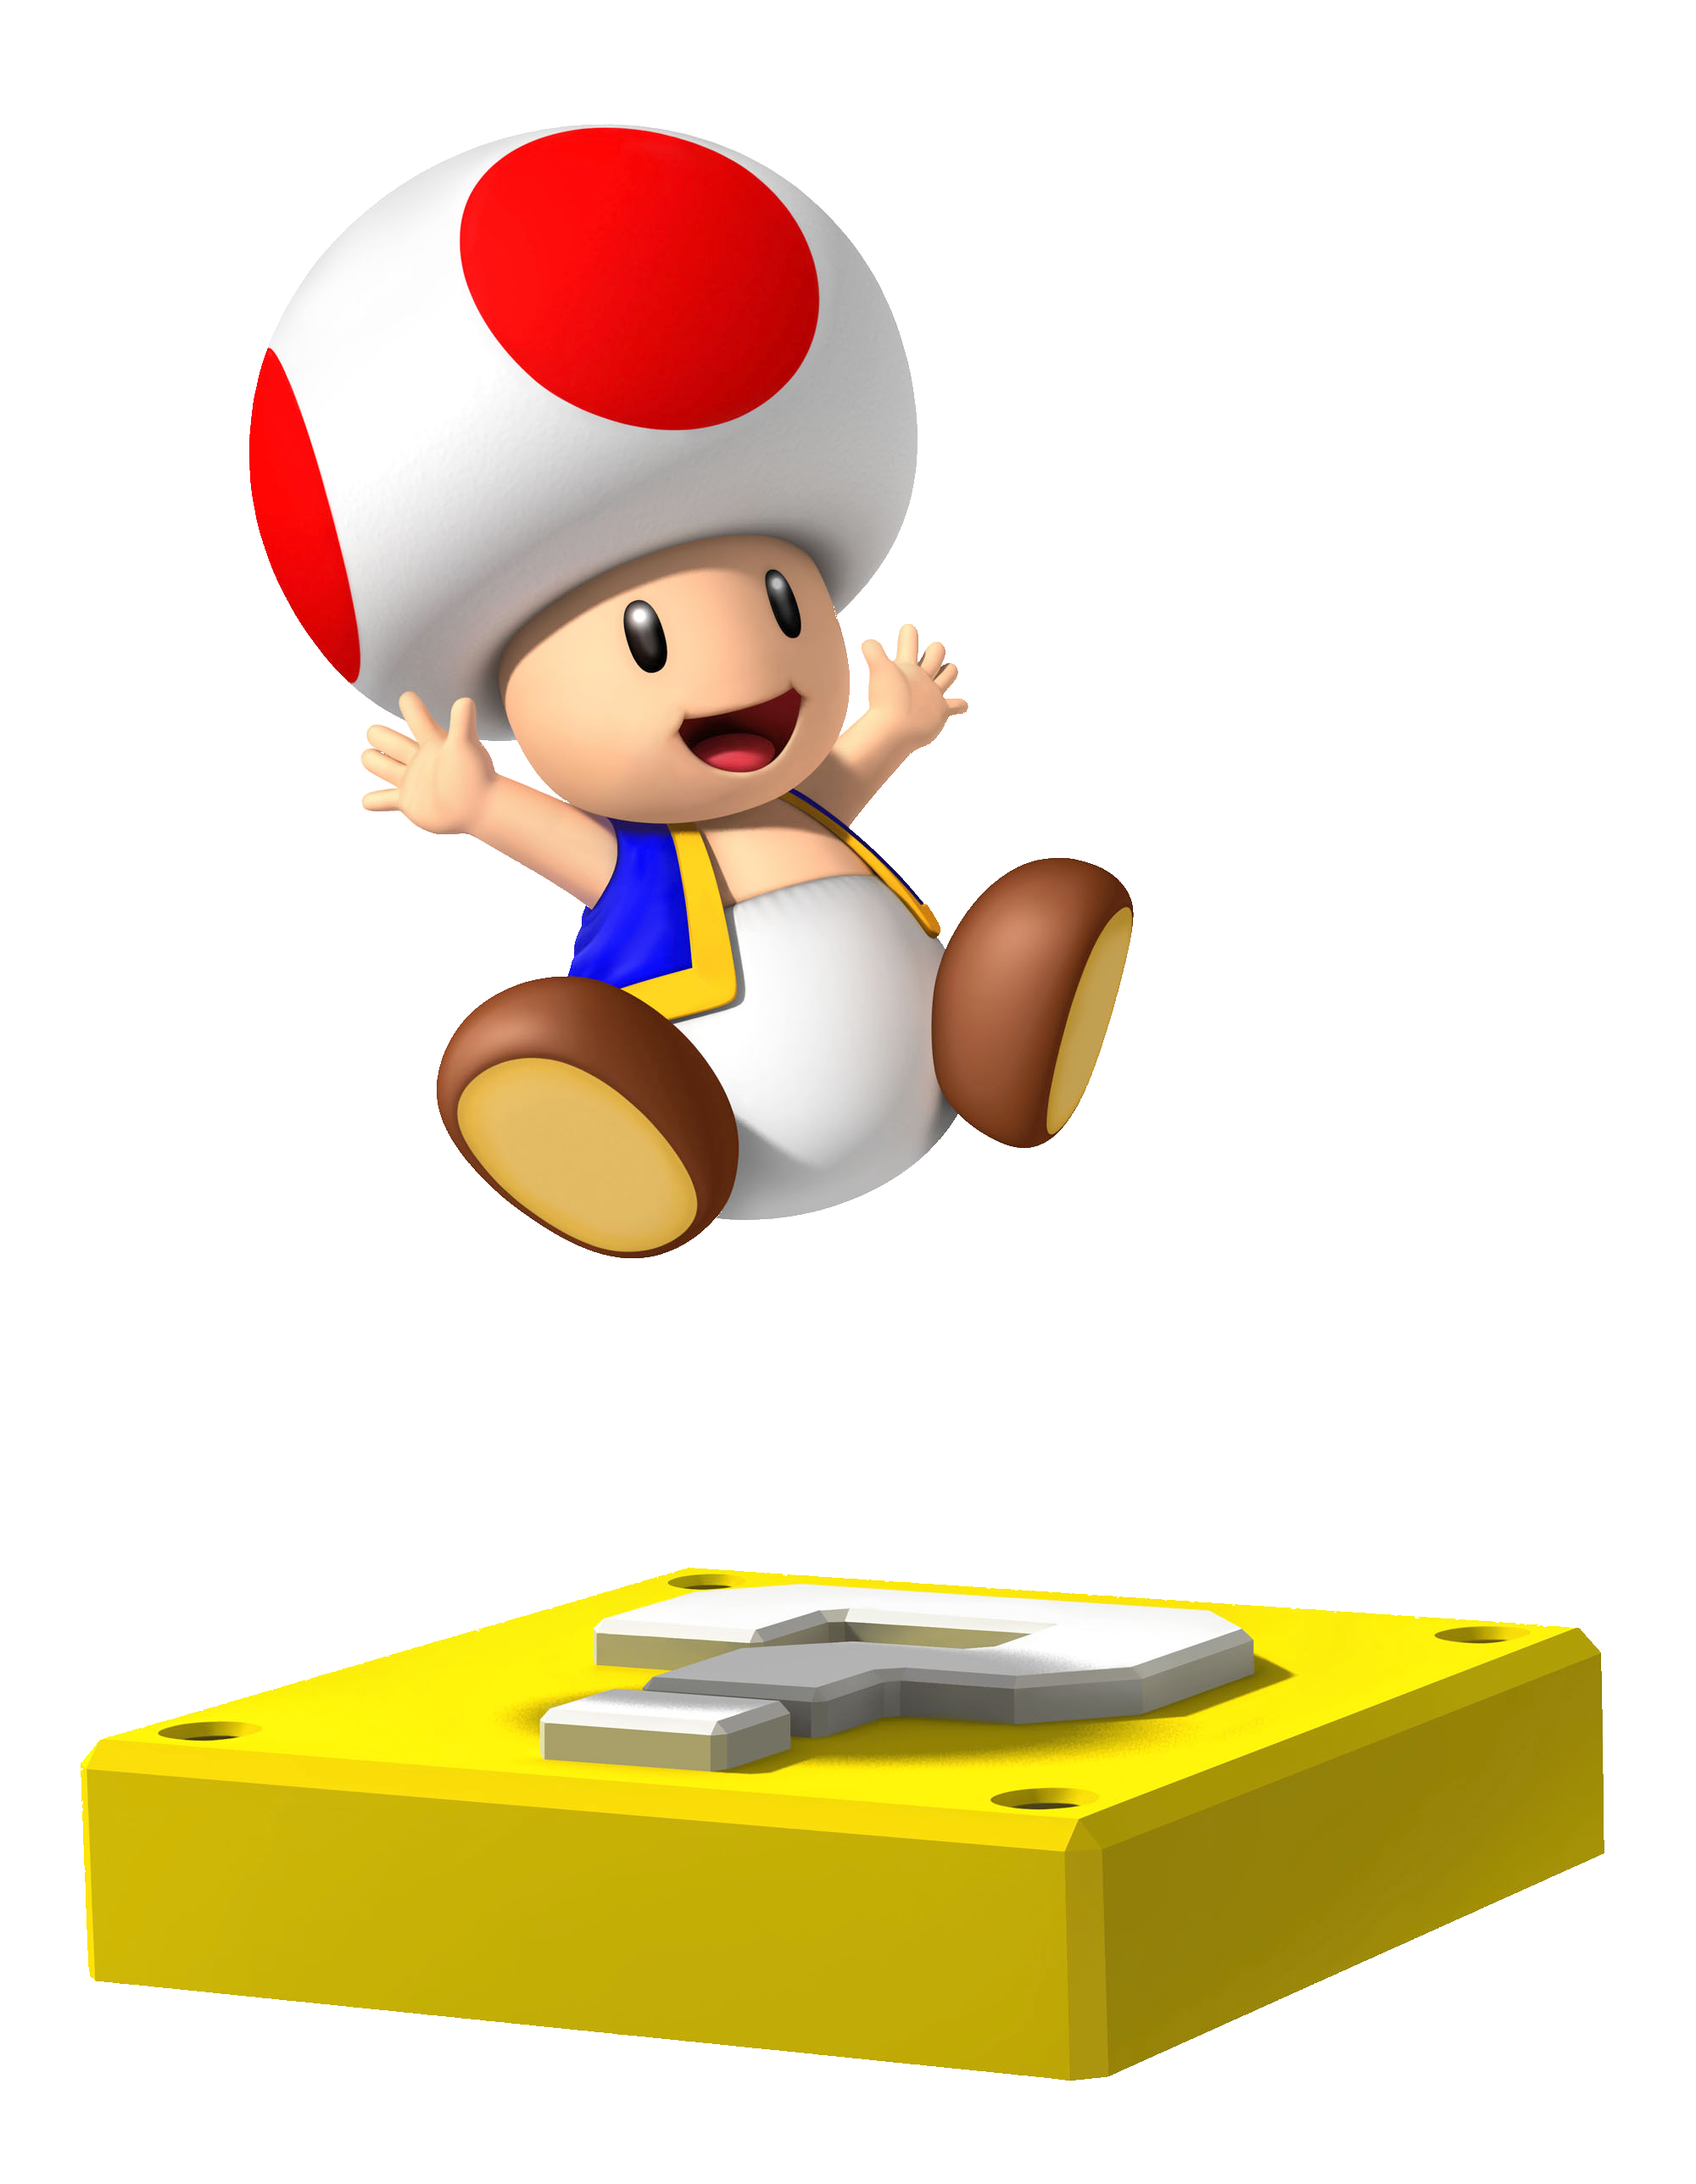 Image Toad Mp9png Fantendo Nintendo Fanon Wiki Fandom Powered By Wikia 4537